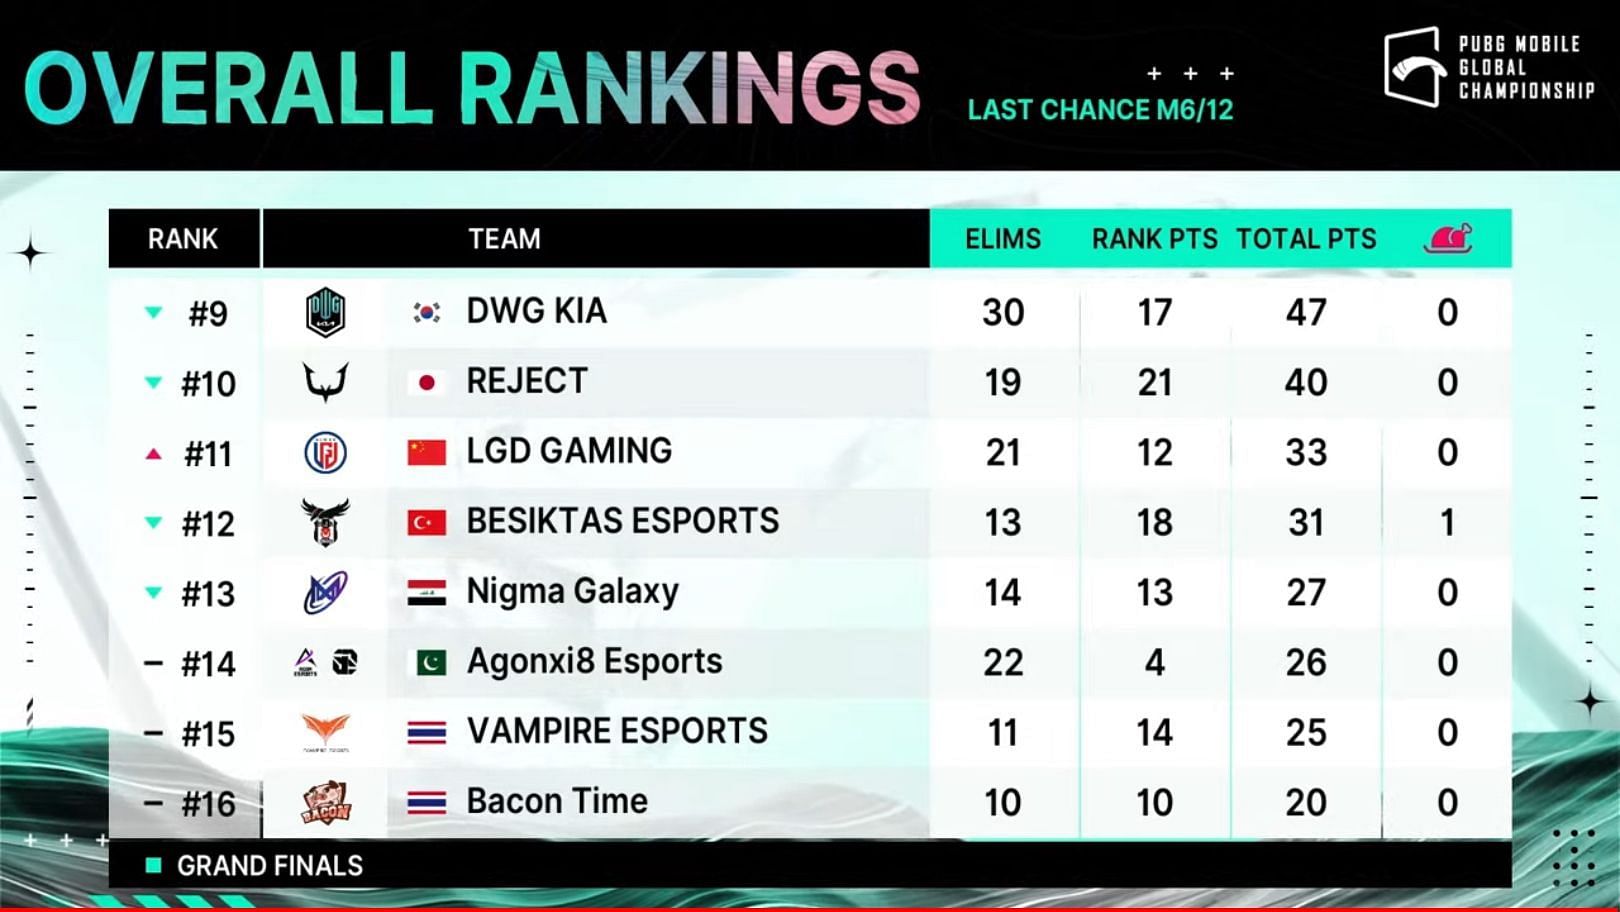 LGD Gaming claimed the 11th spot after PMGC Last Chance Day 1 (Image via PUBG Mobile)